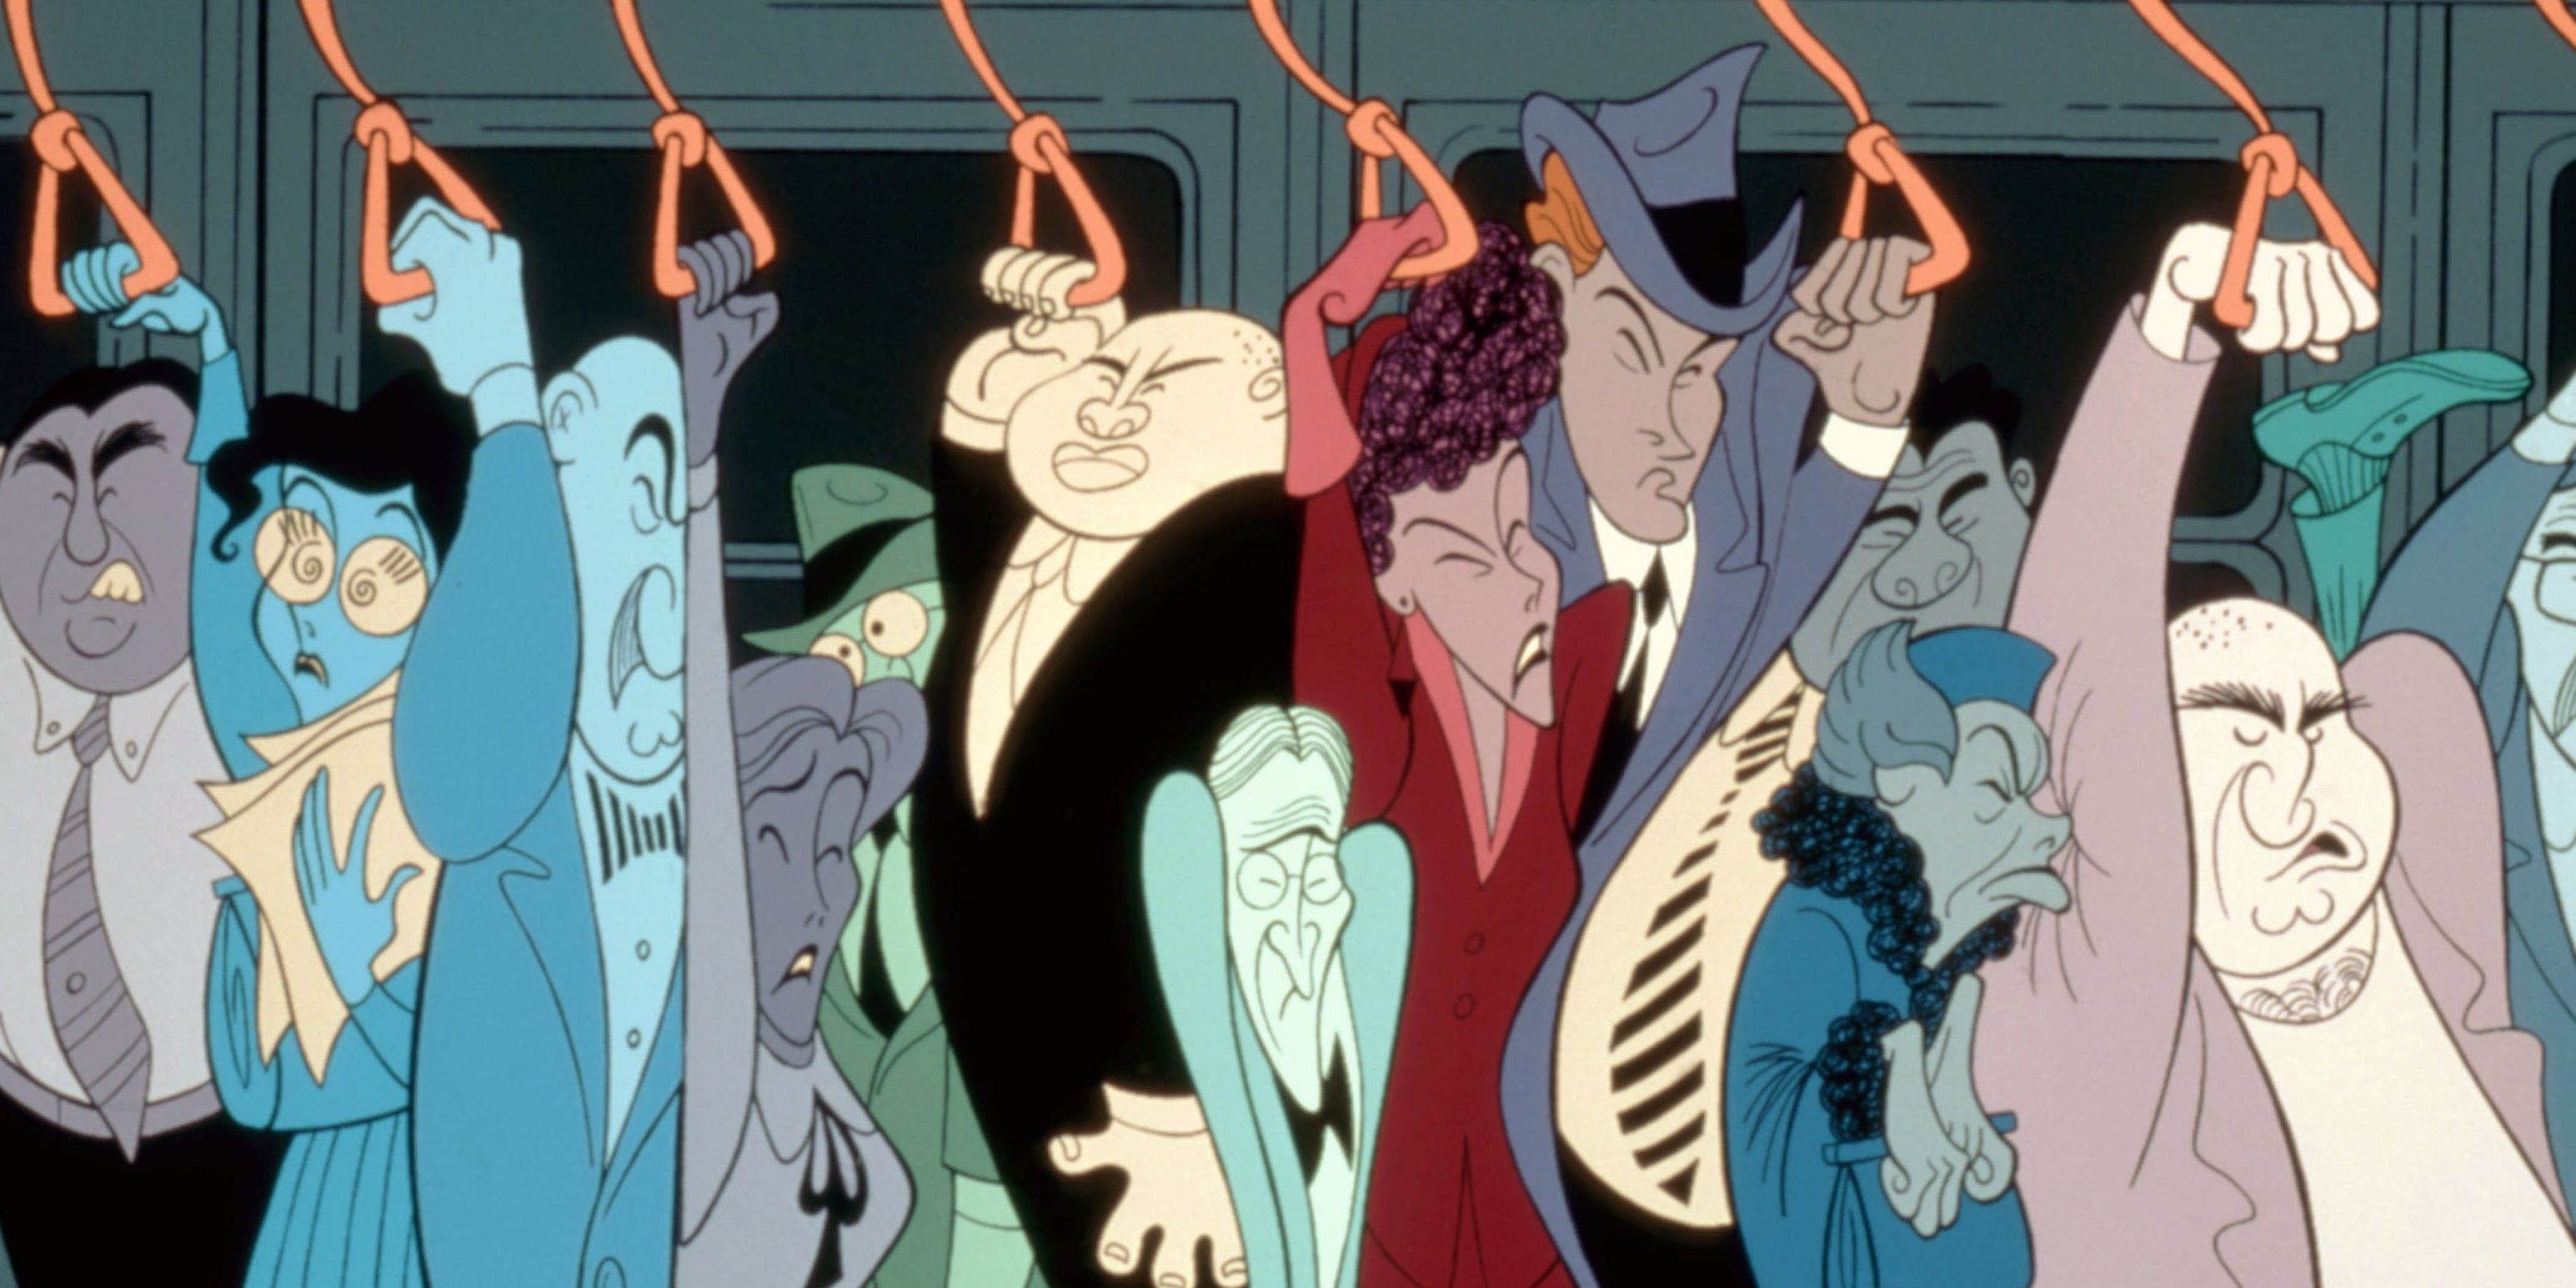 The crowd in Fantasia 2000